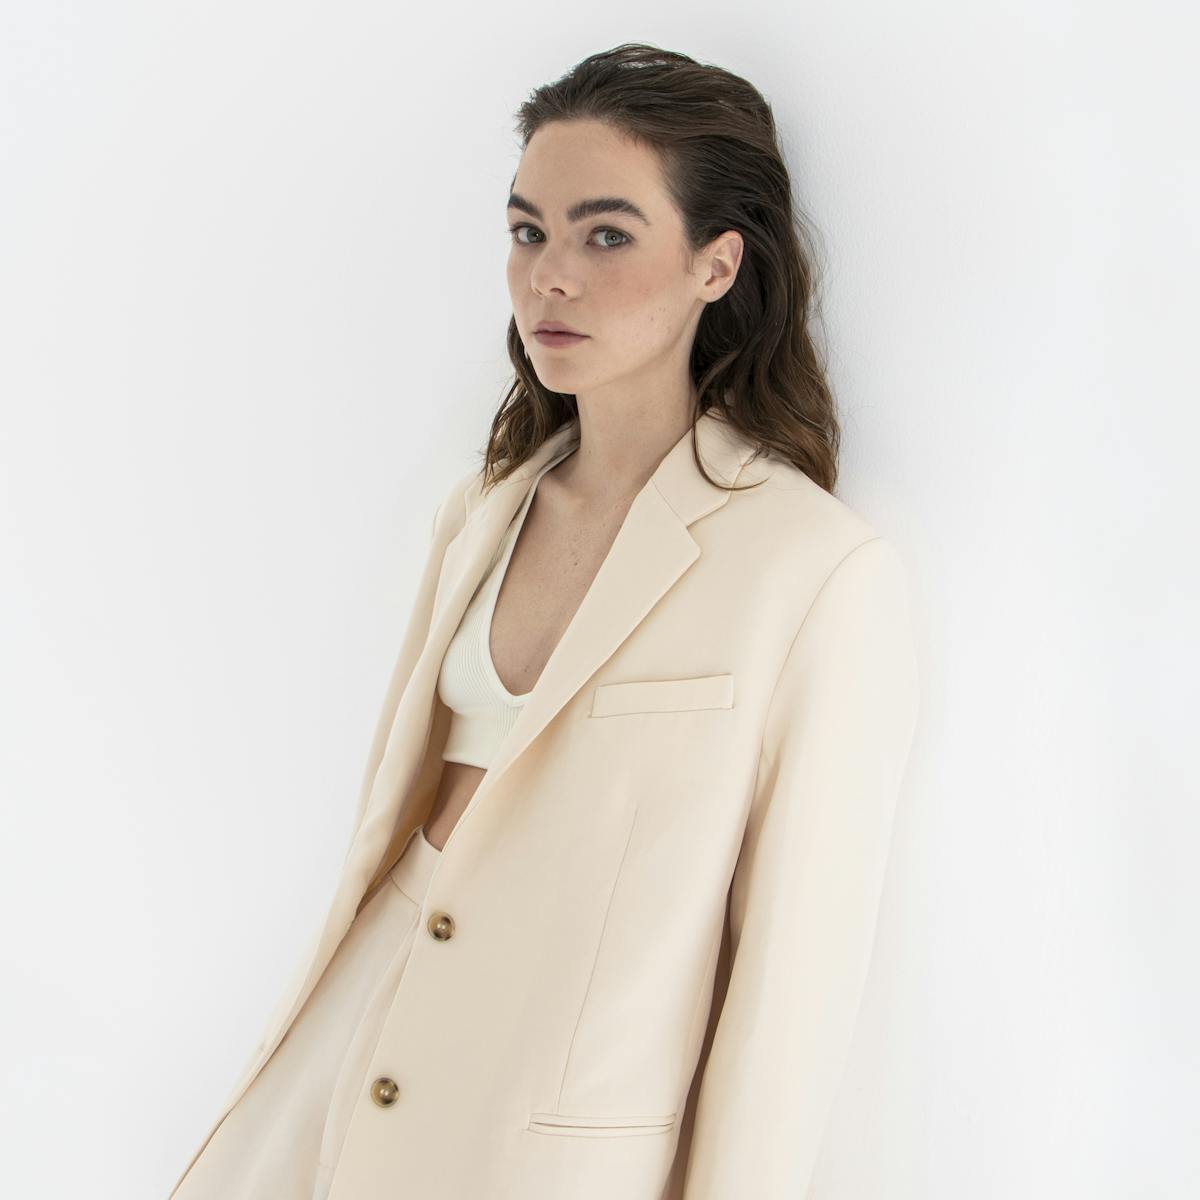 Ximena Lamadrid wears a beige suit and white top.